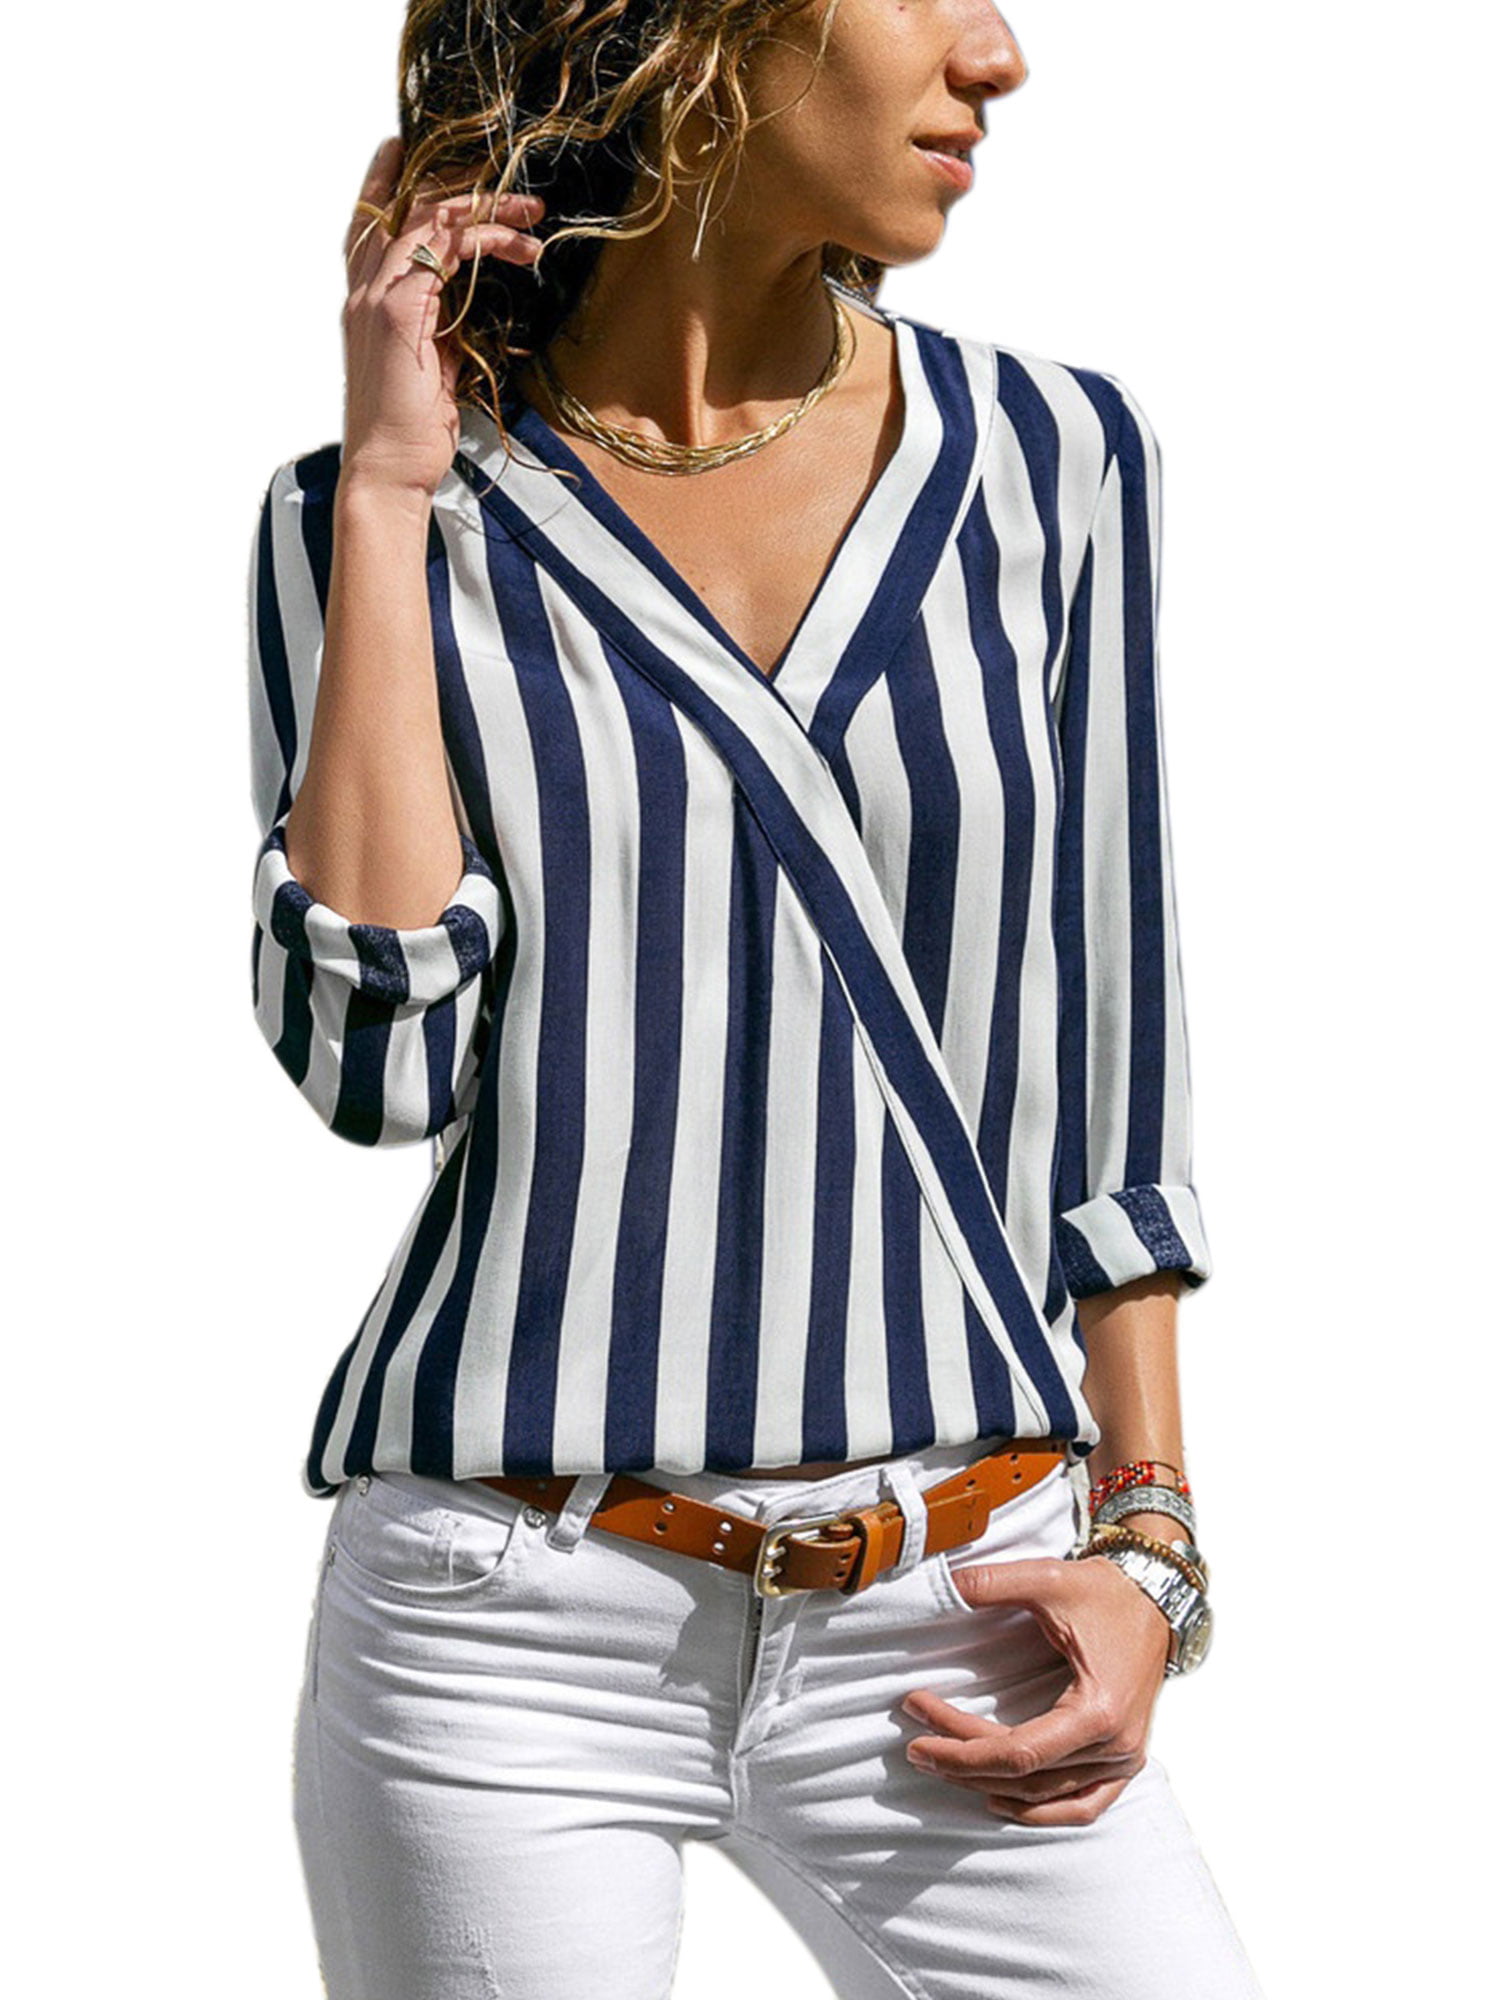 HiMONE - Womens Striped Shirt Casual Blouse Long Sleeve V Neck Loose ...